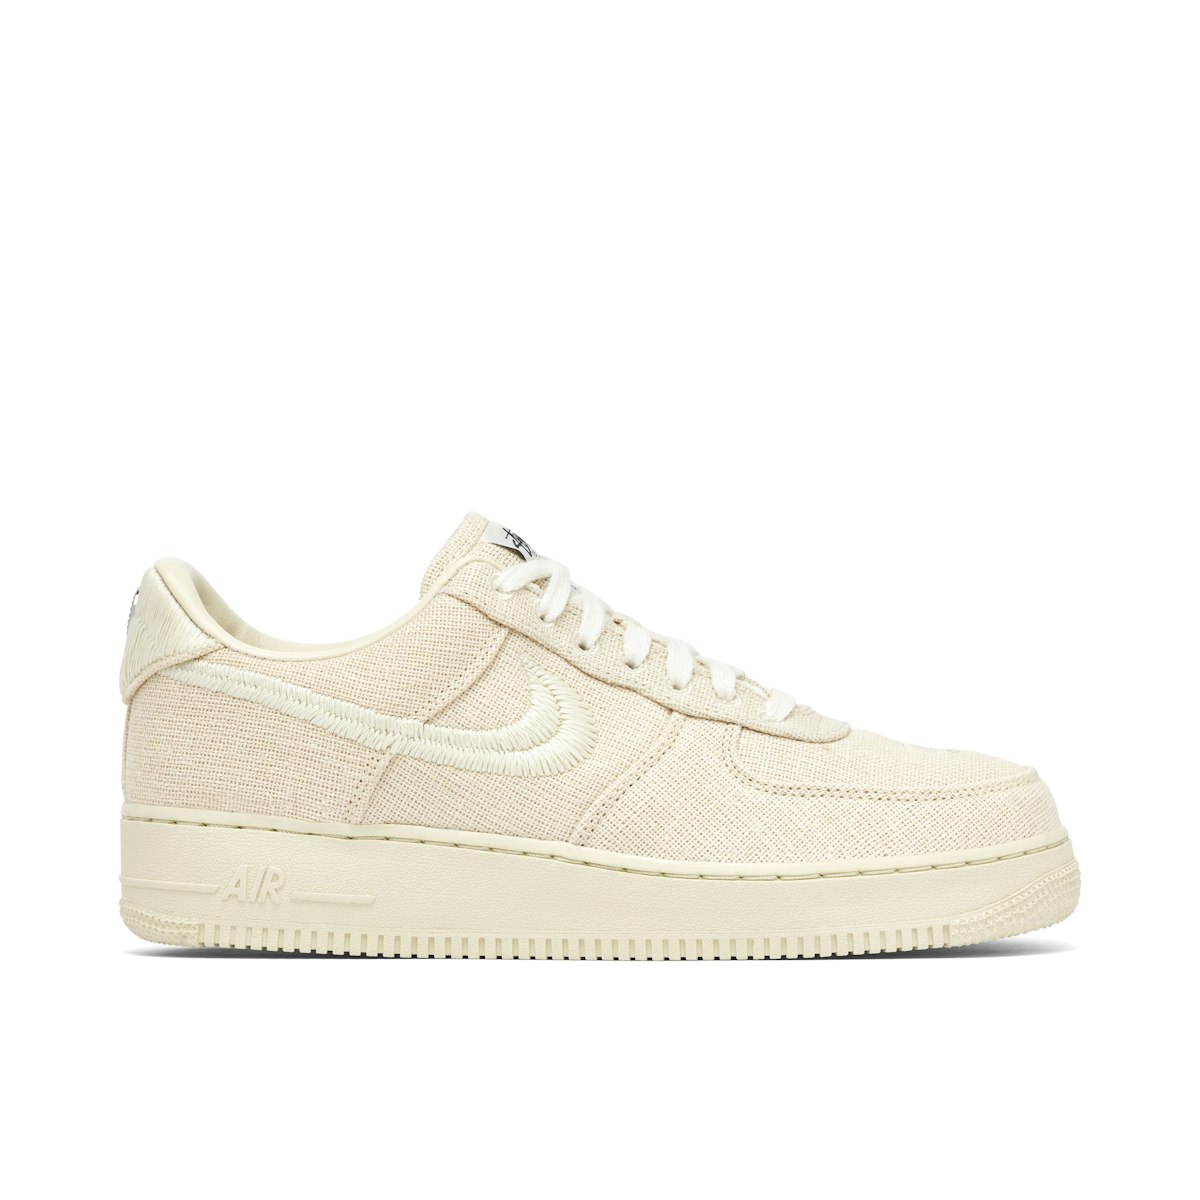 Nike Air Force 1 Low Stussy Fossil ps size 2.5